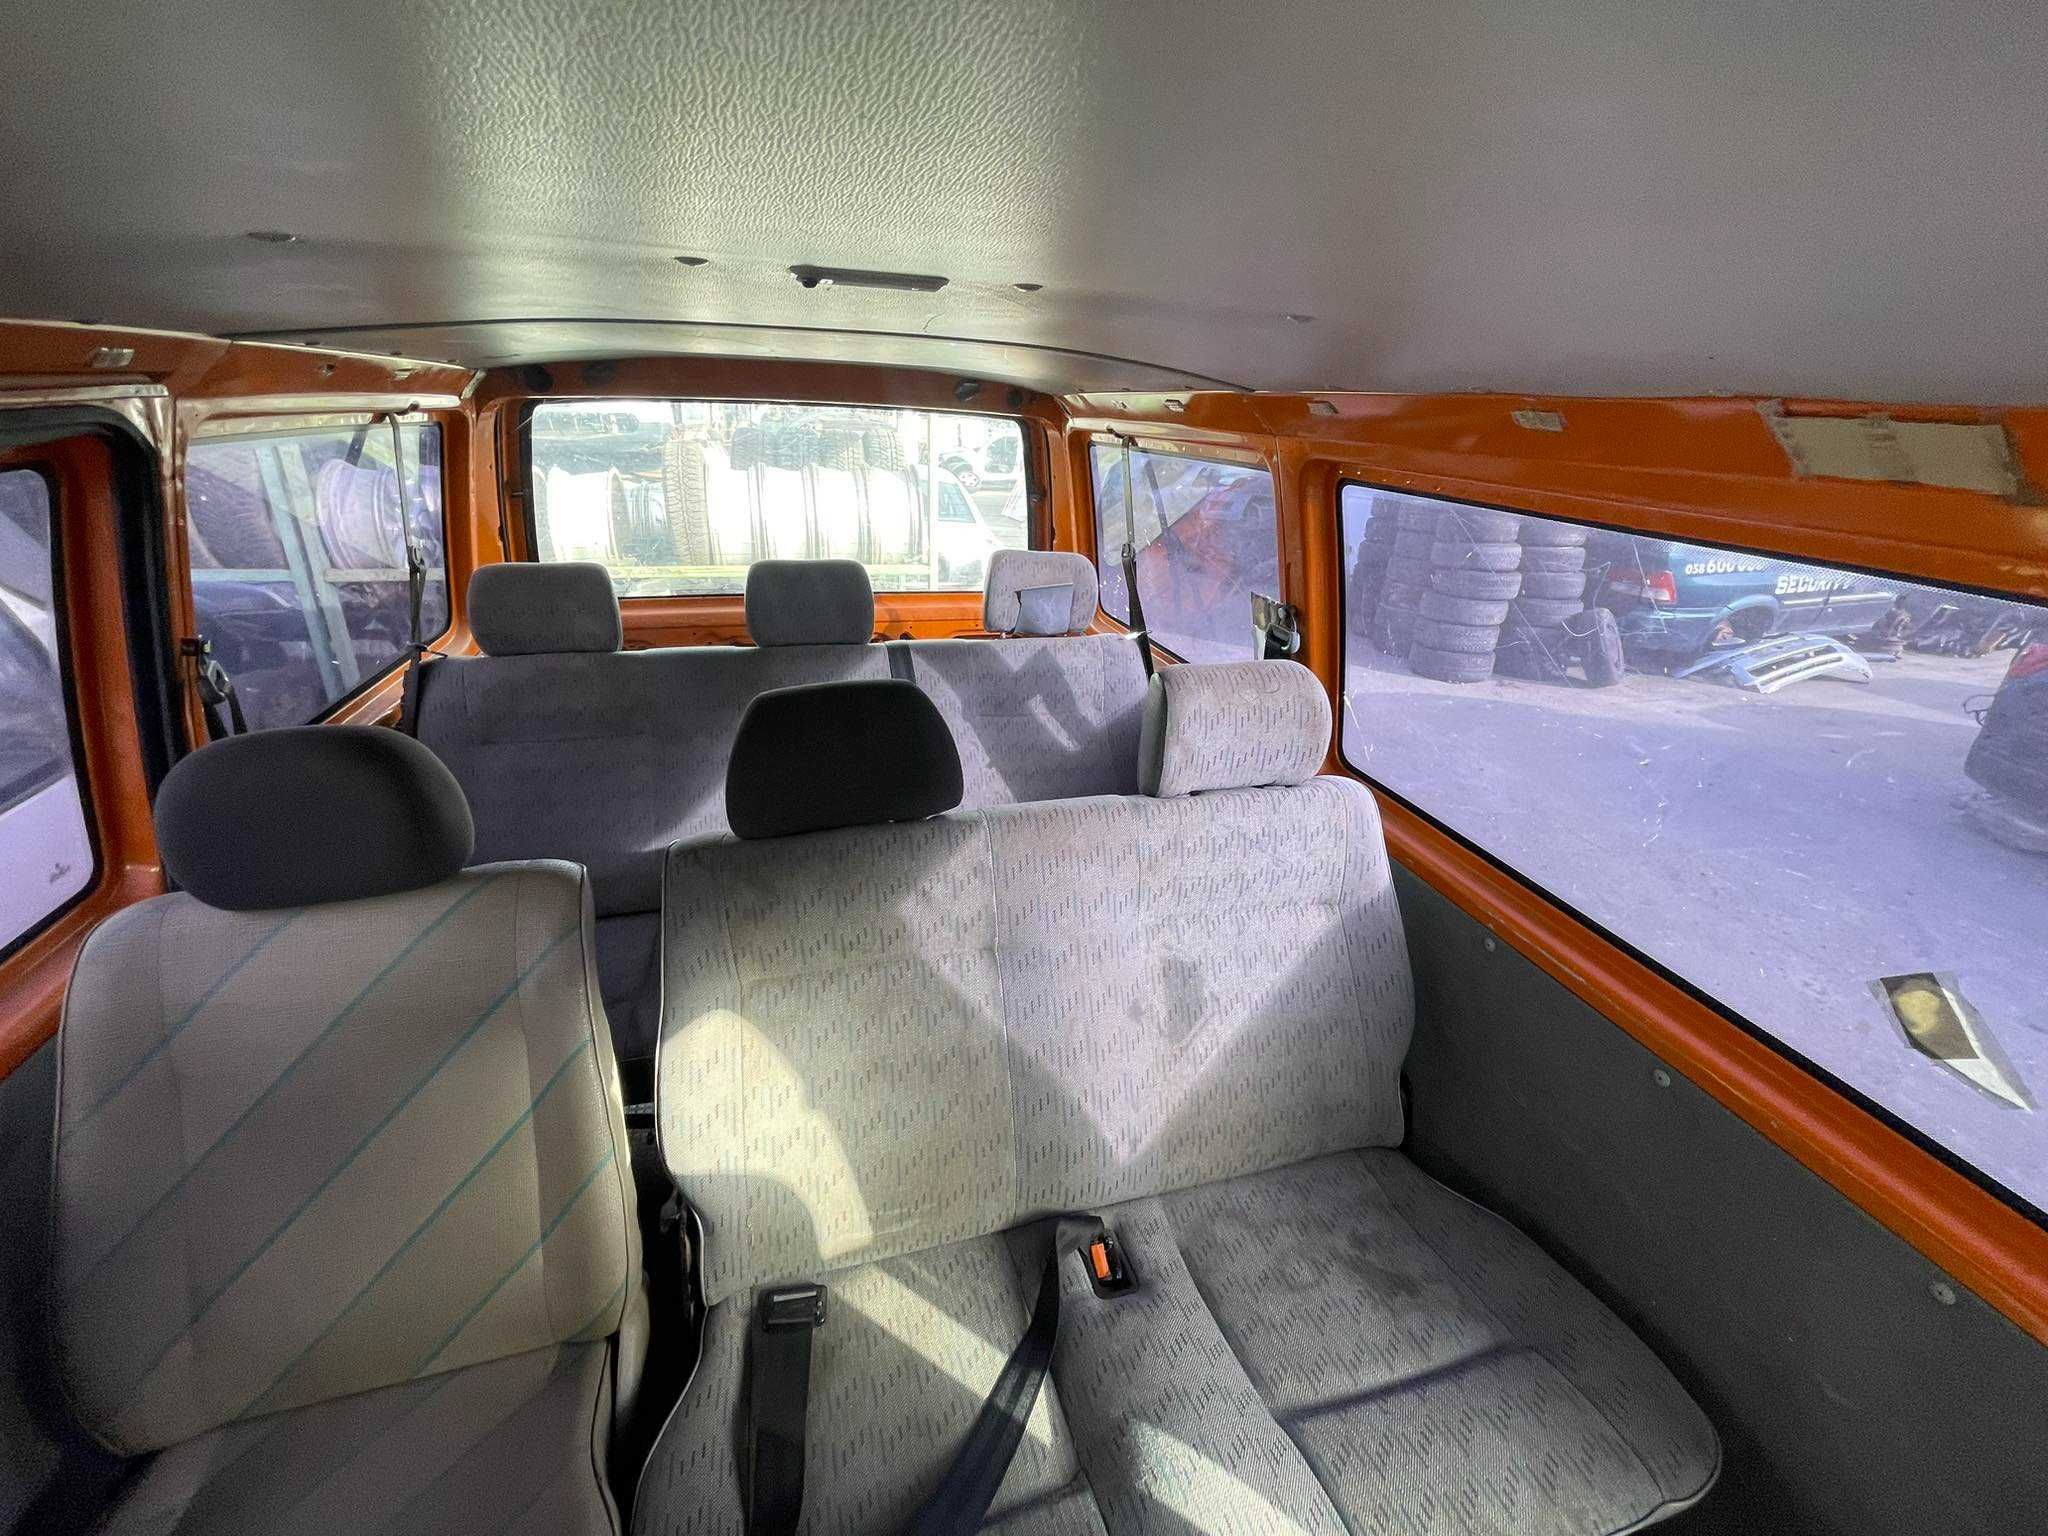 vw t4 transporter caravelle 1.9d  на части т4 каравеле мултиван